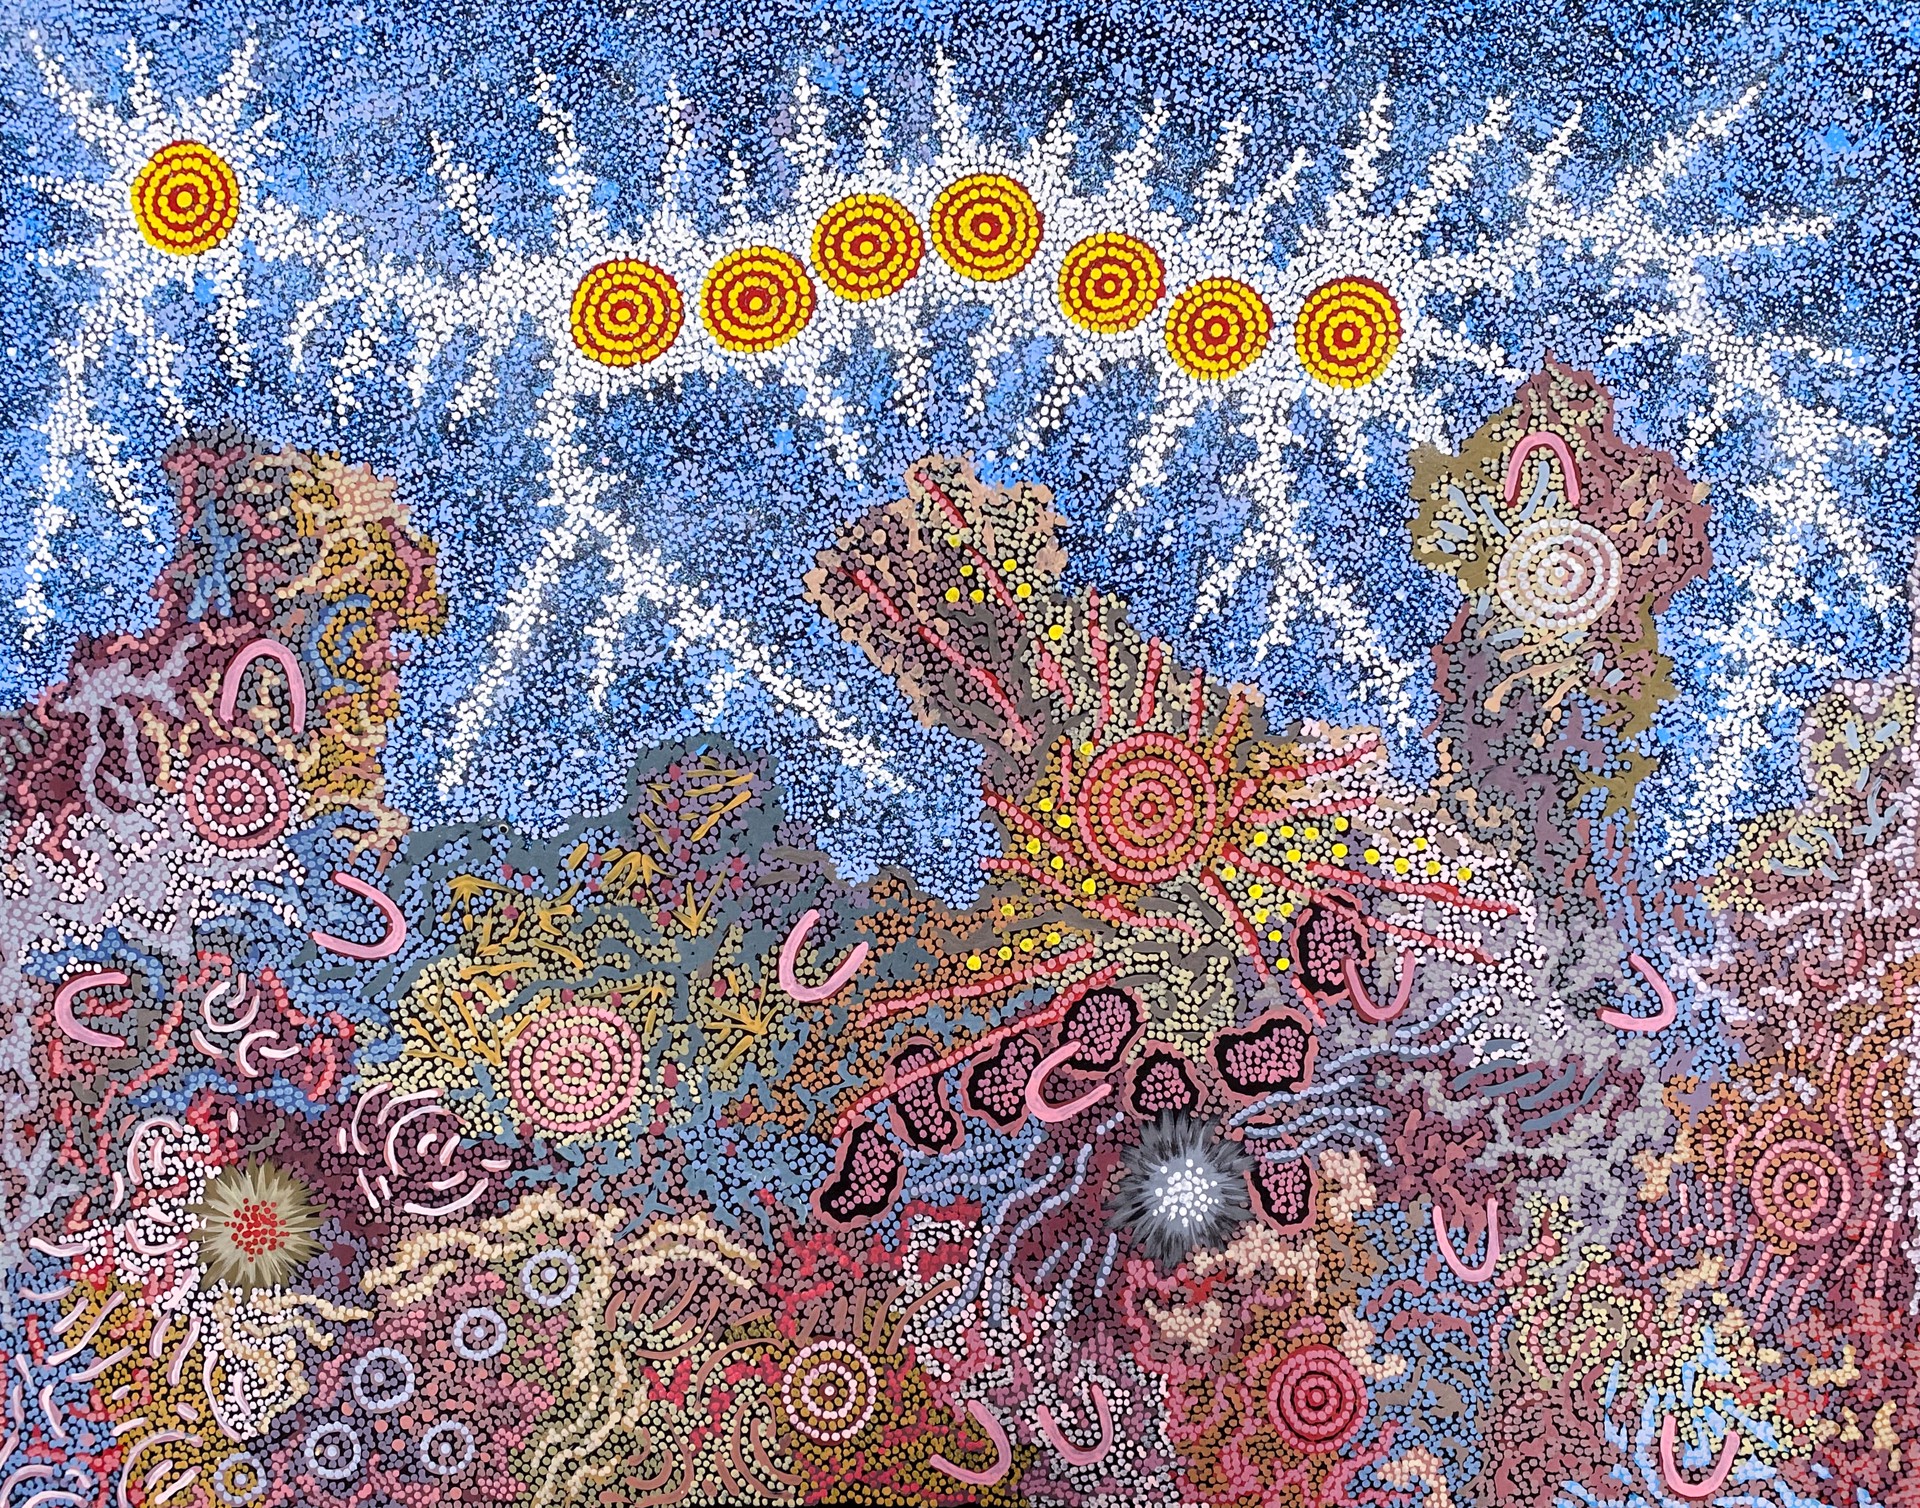 Grandmother's Country & Seven Sisters Dreaming by Gabriella Possum Nungurrayi